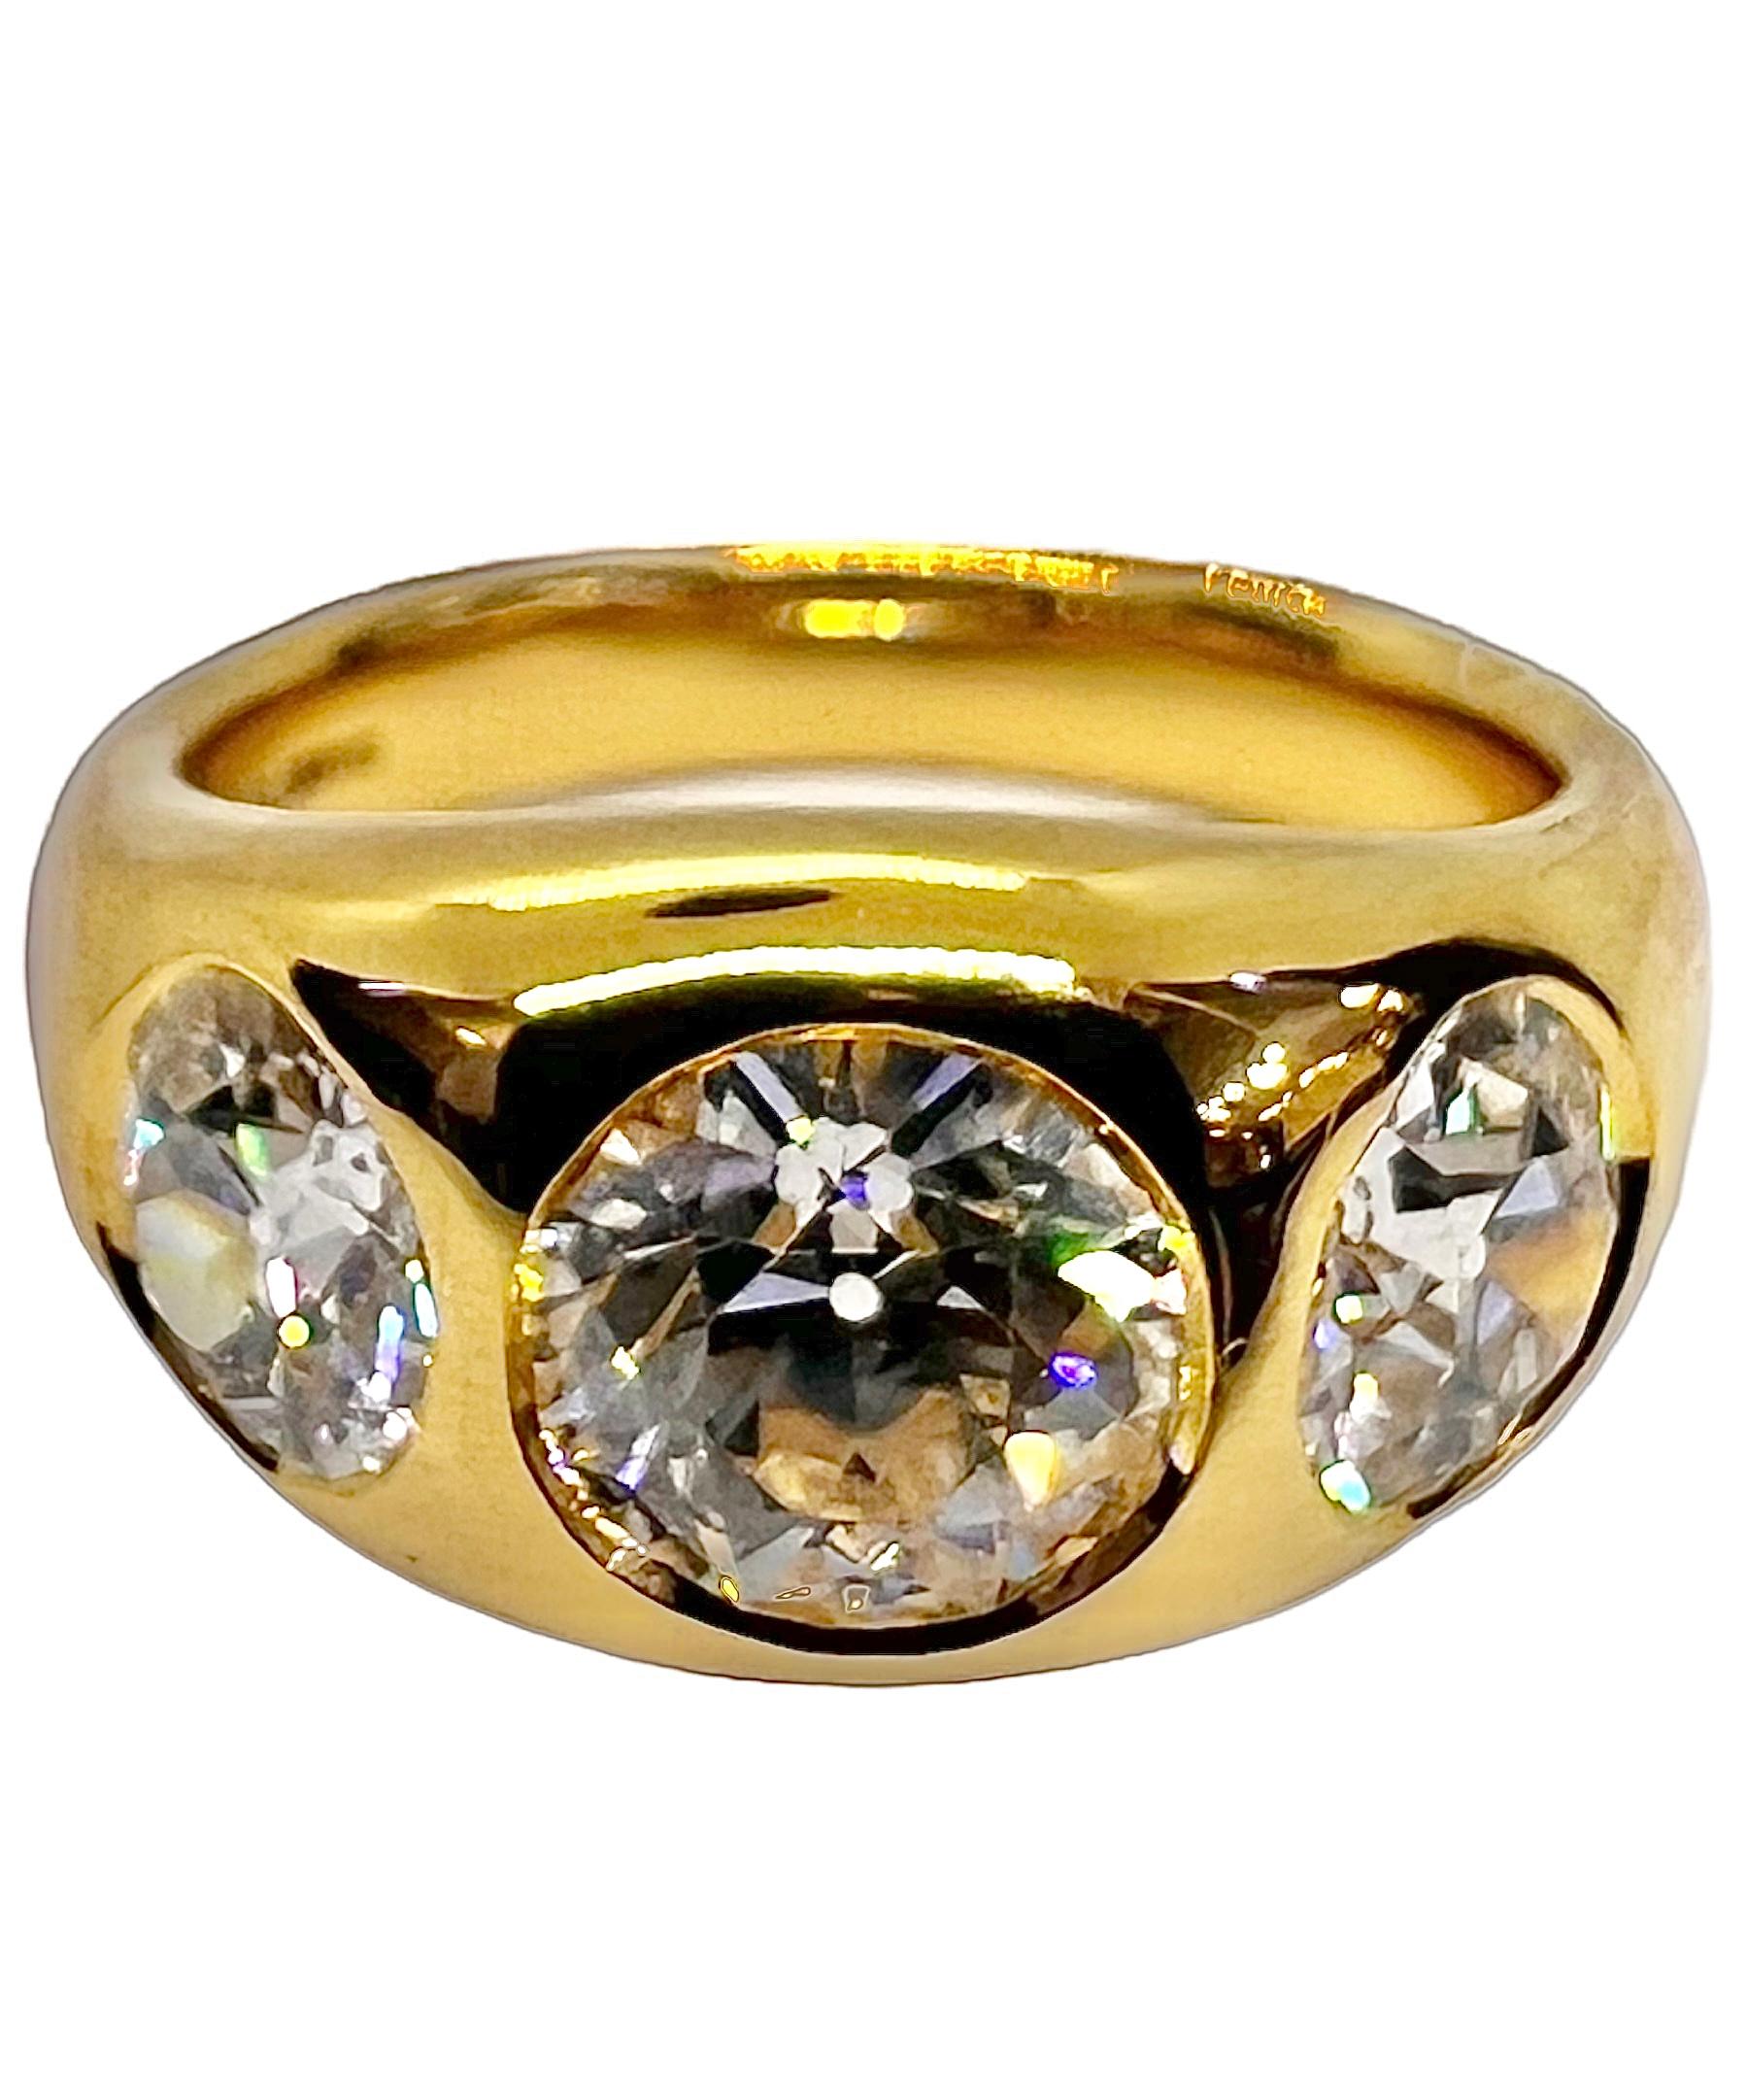 Diamond ring set in 18K yellow gold with 1.30 carat diamond, 0.72 carat ISI1 diamond and 0.72 carat HS12 carat diamond. 

Sophia D by Joseph Dardashti LTD has been known worldwide for 35 years and are inspired by classic Art Deco design that merges